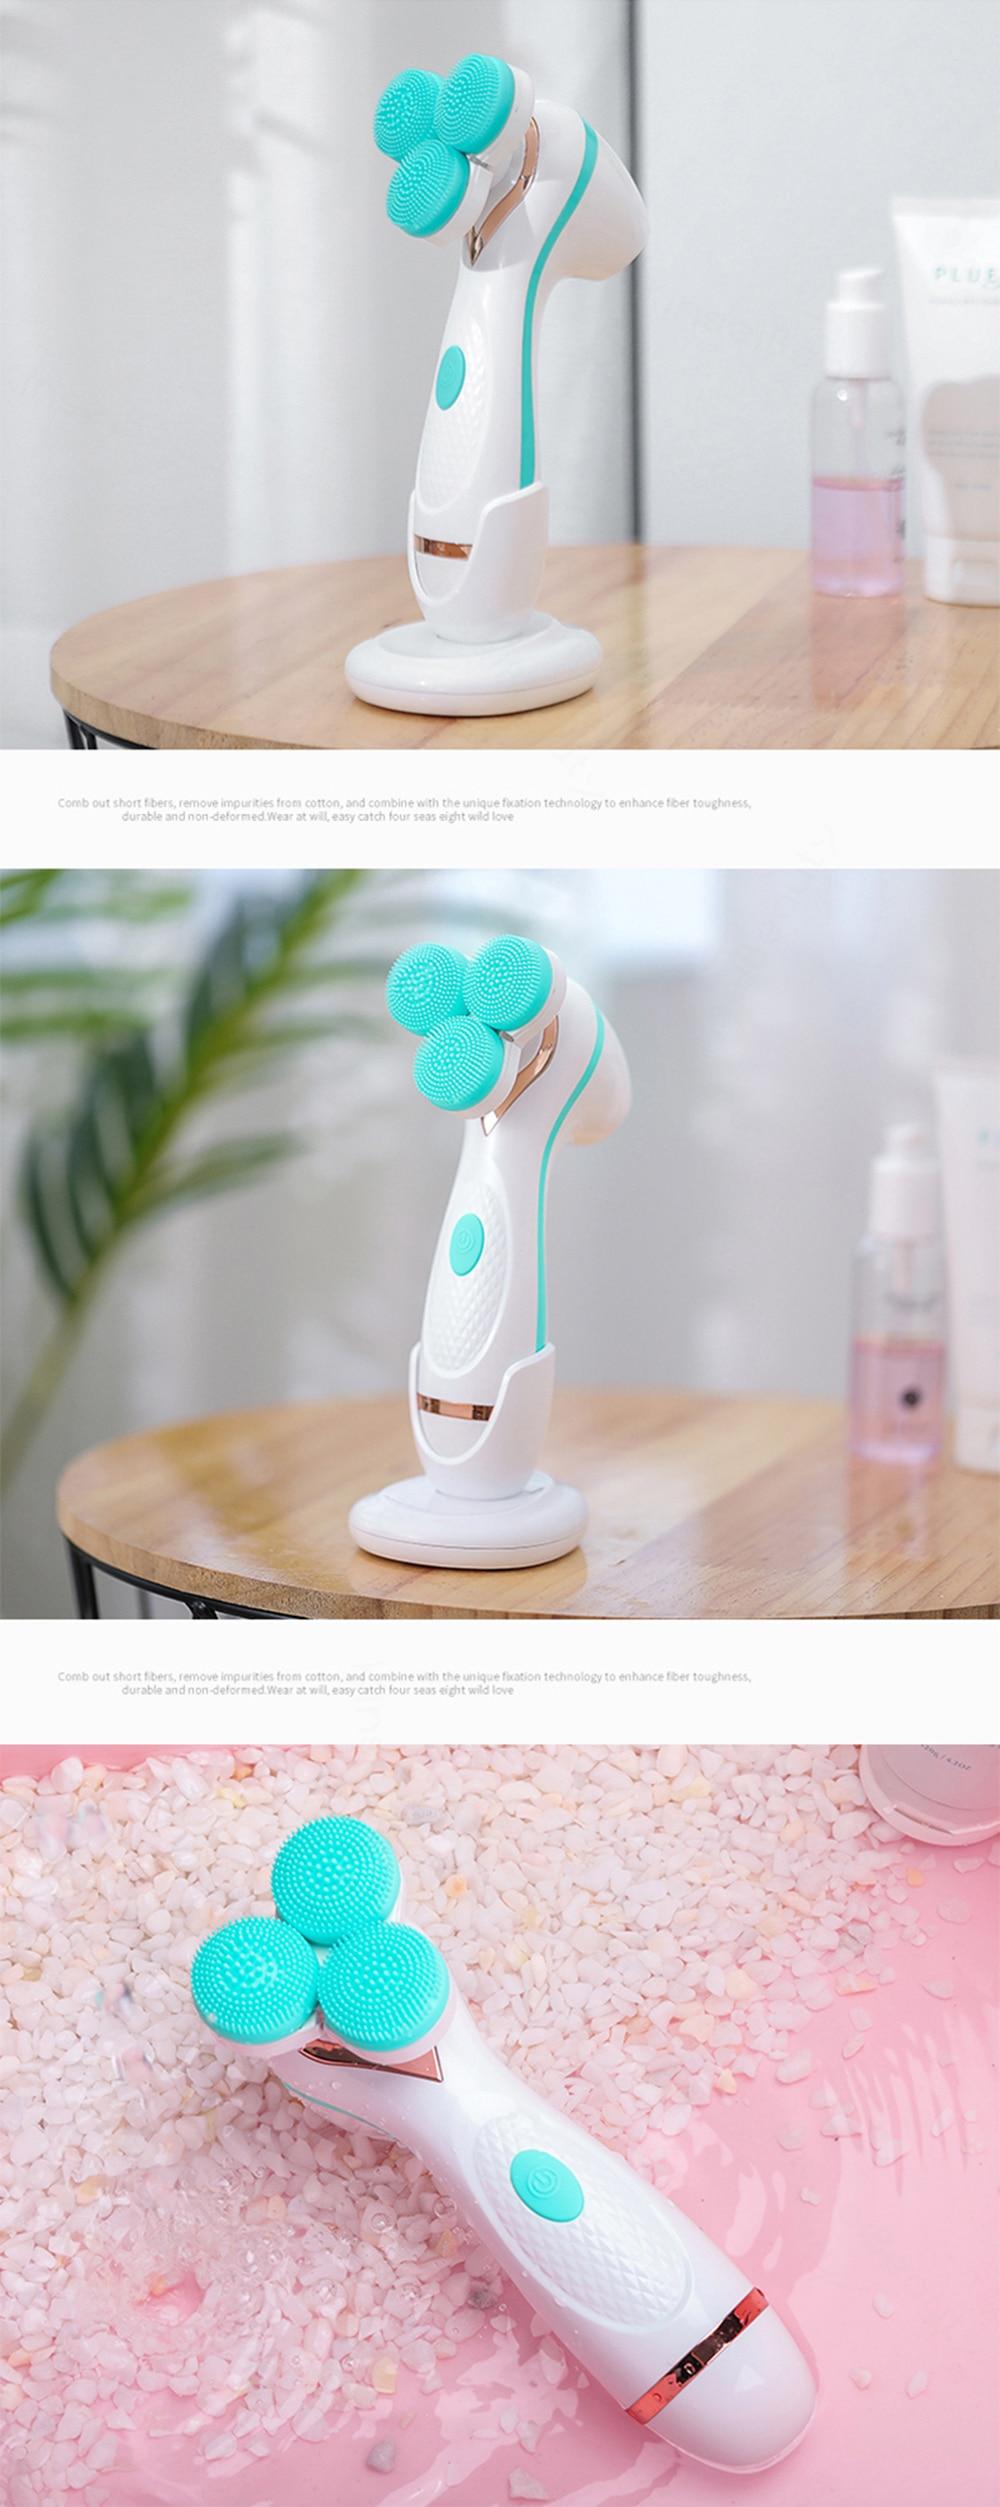 3D V Face Lift Facial Cleansing Brush Electric Face Care Cleanser Brush Blackhead Remover Acne Pore Cleanser Machine, Waterproof